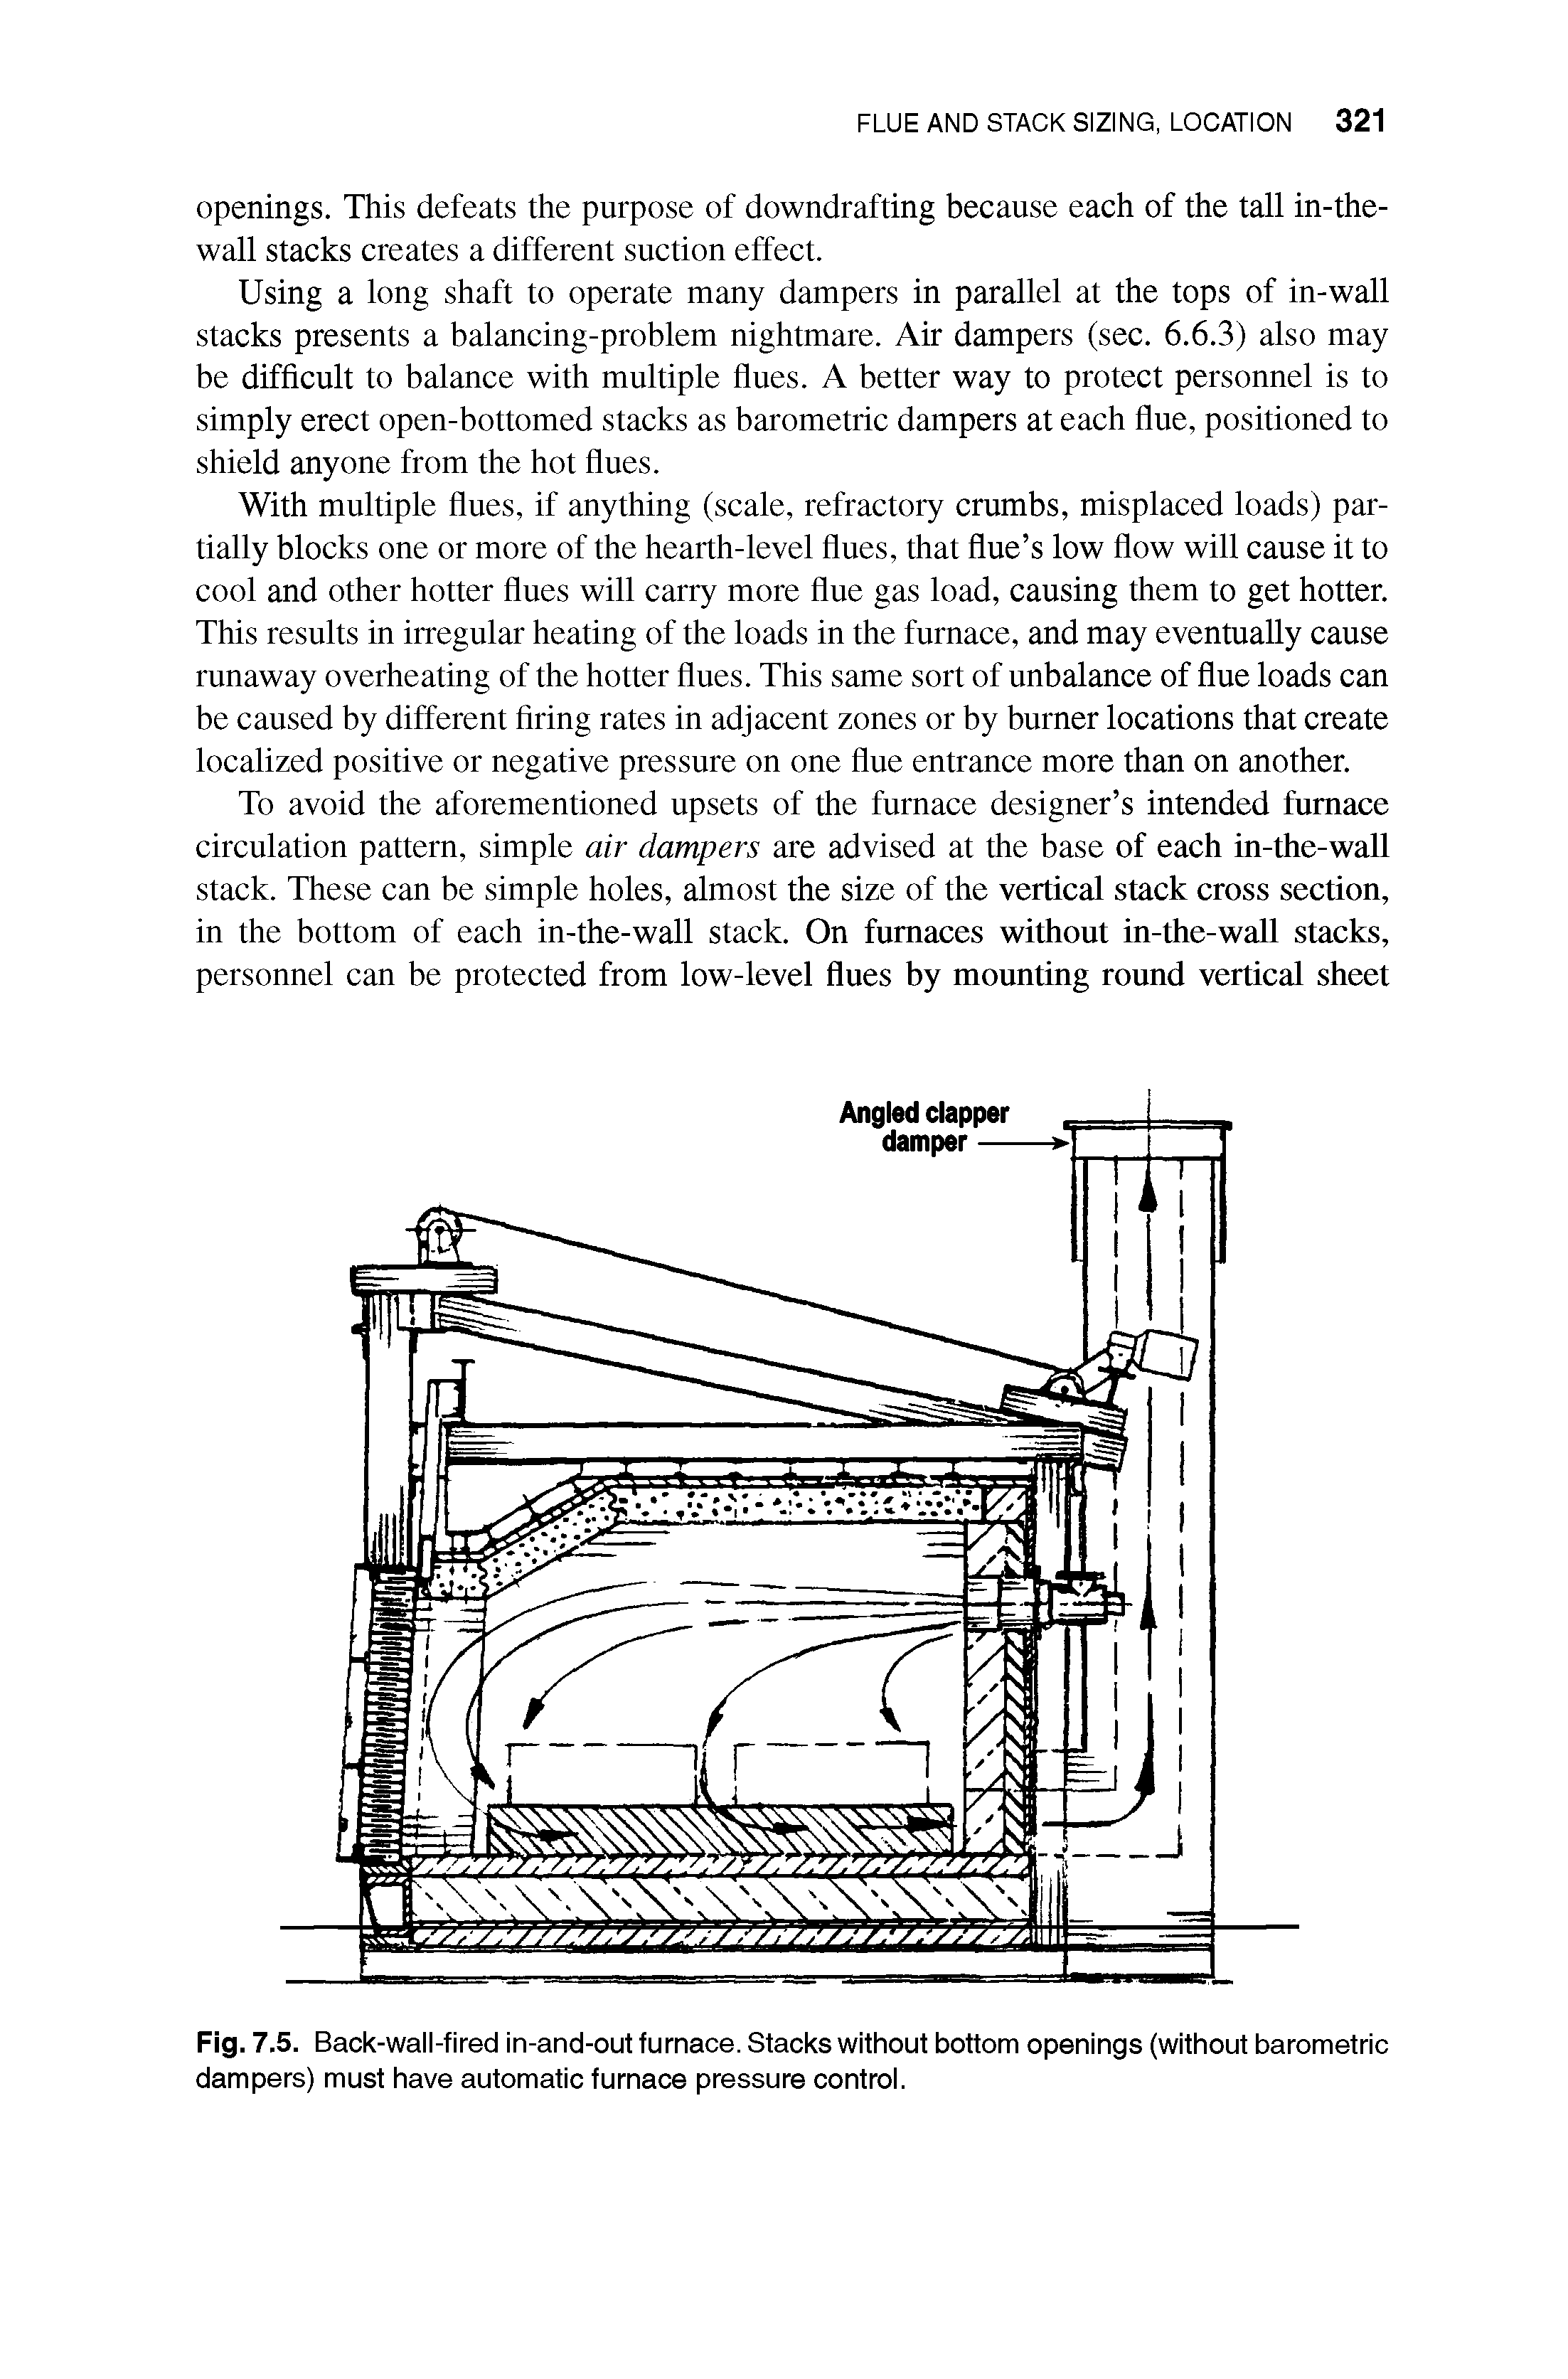 Fig. 7.5. Back-wall-fired in-and-out furnace. Stacks without bottom openings (without barometric dampers) must have automatic furnace pressure control.